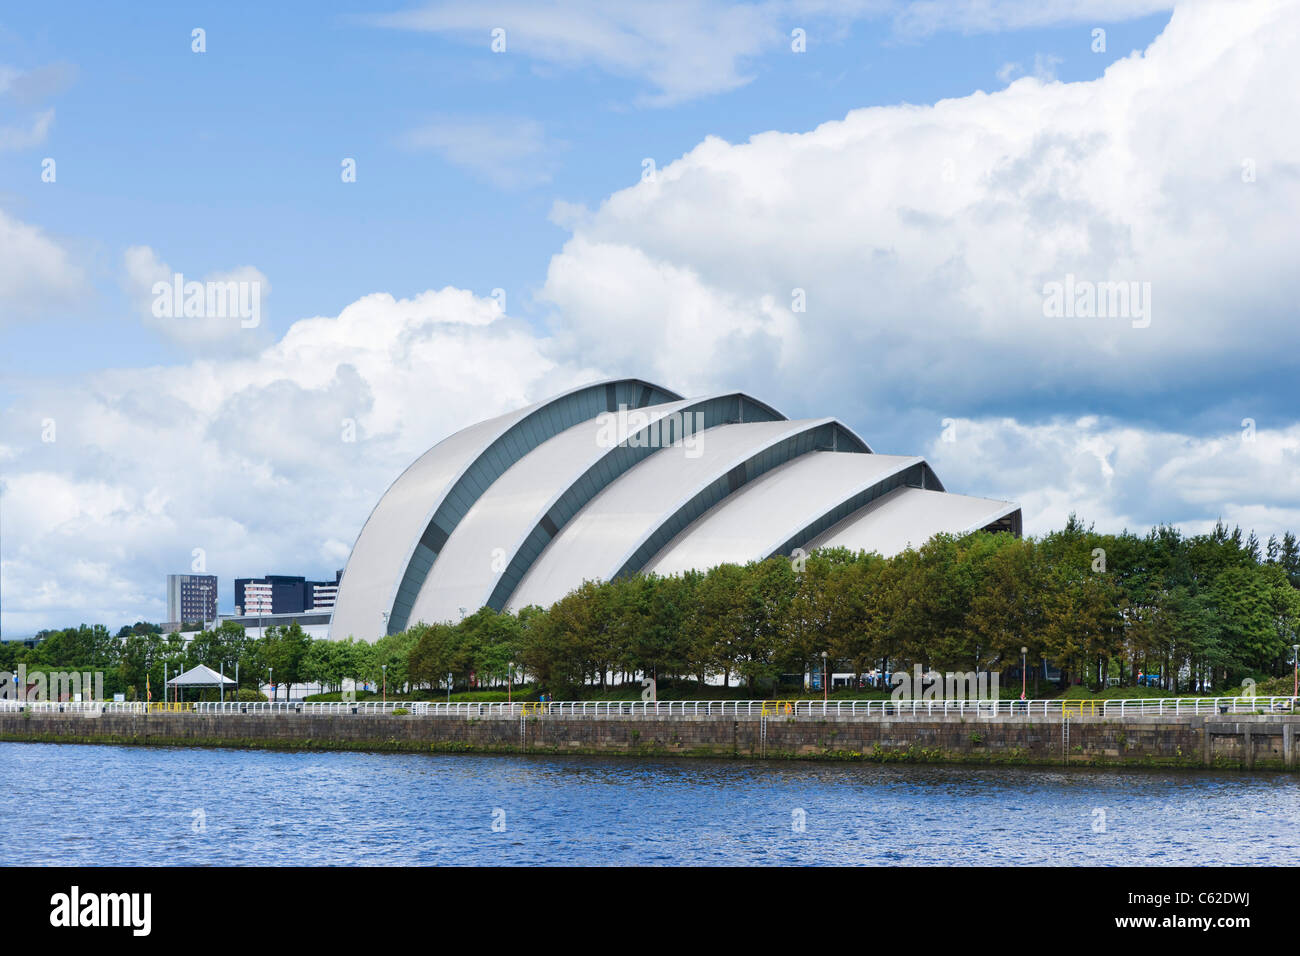 'The Armadillo' (The Clyde Auditorium) on the banks of the River Clyde, Glasgow, Scotland, UK Stock Photo